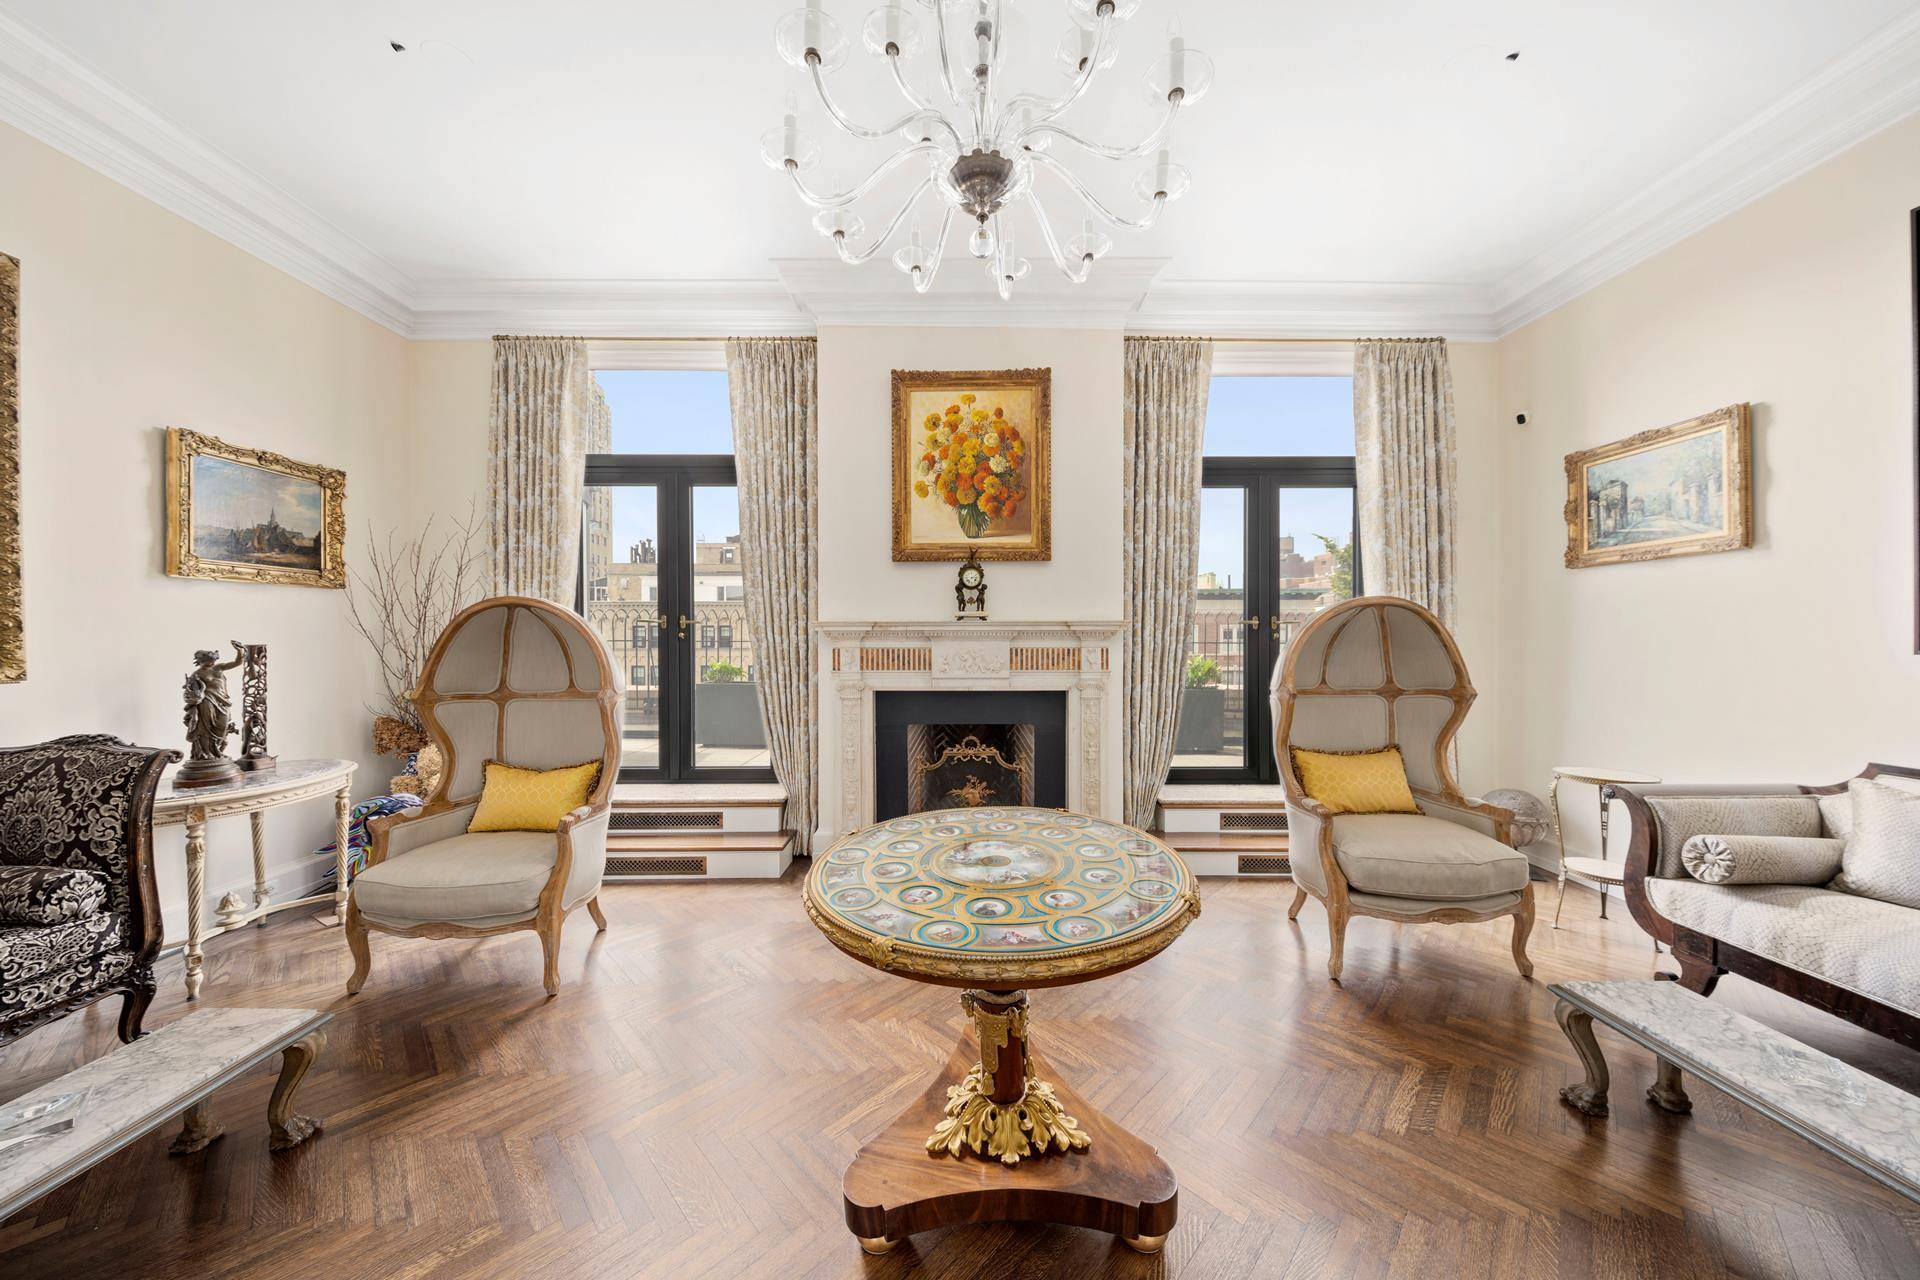 Sun flooded dream penthouse situated at the top of one of Park Avenue's most coveted cooperatives.